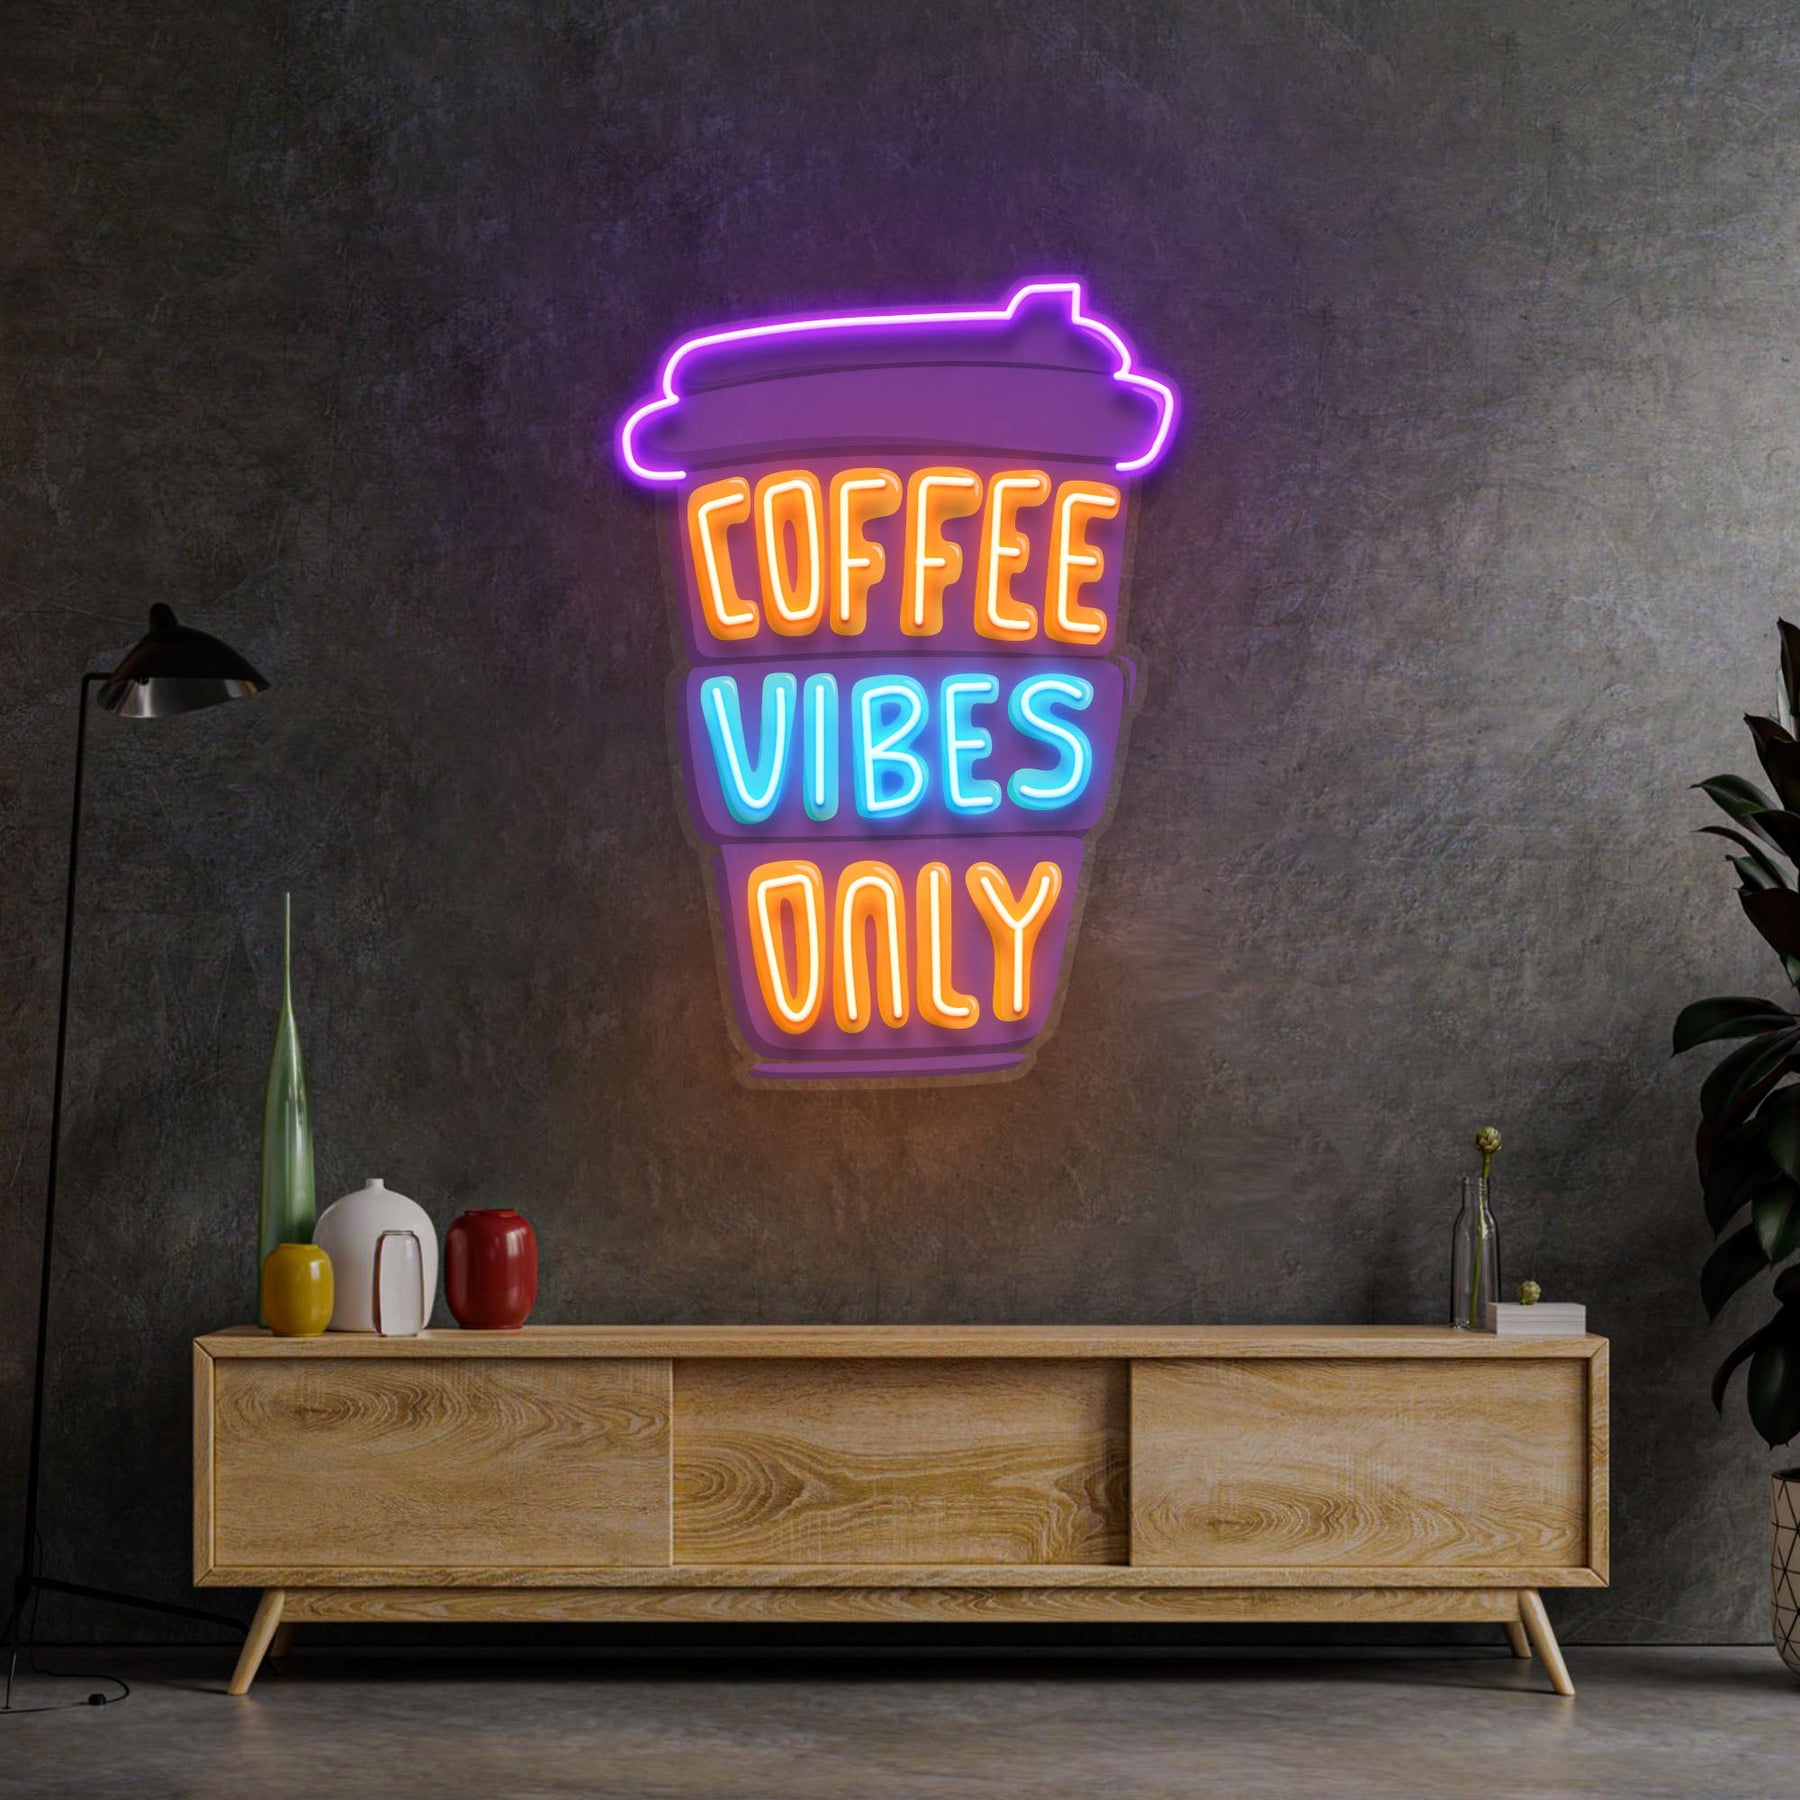 Coffee Vibes Only LED Neon Sign Light Pop Art